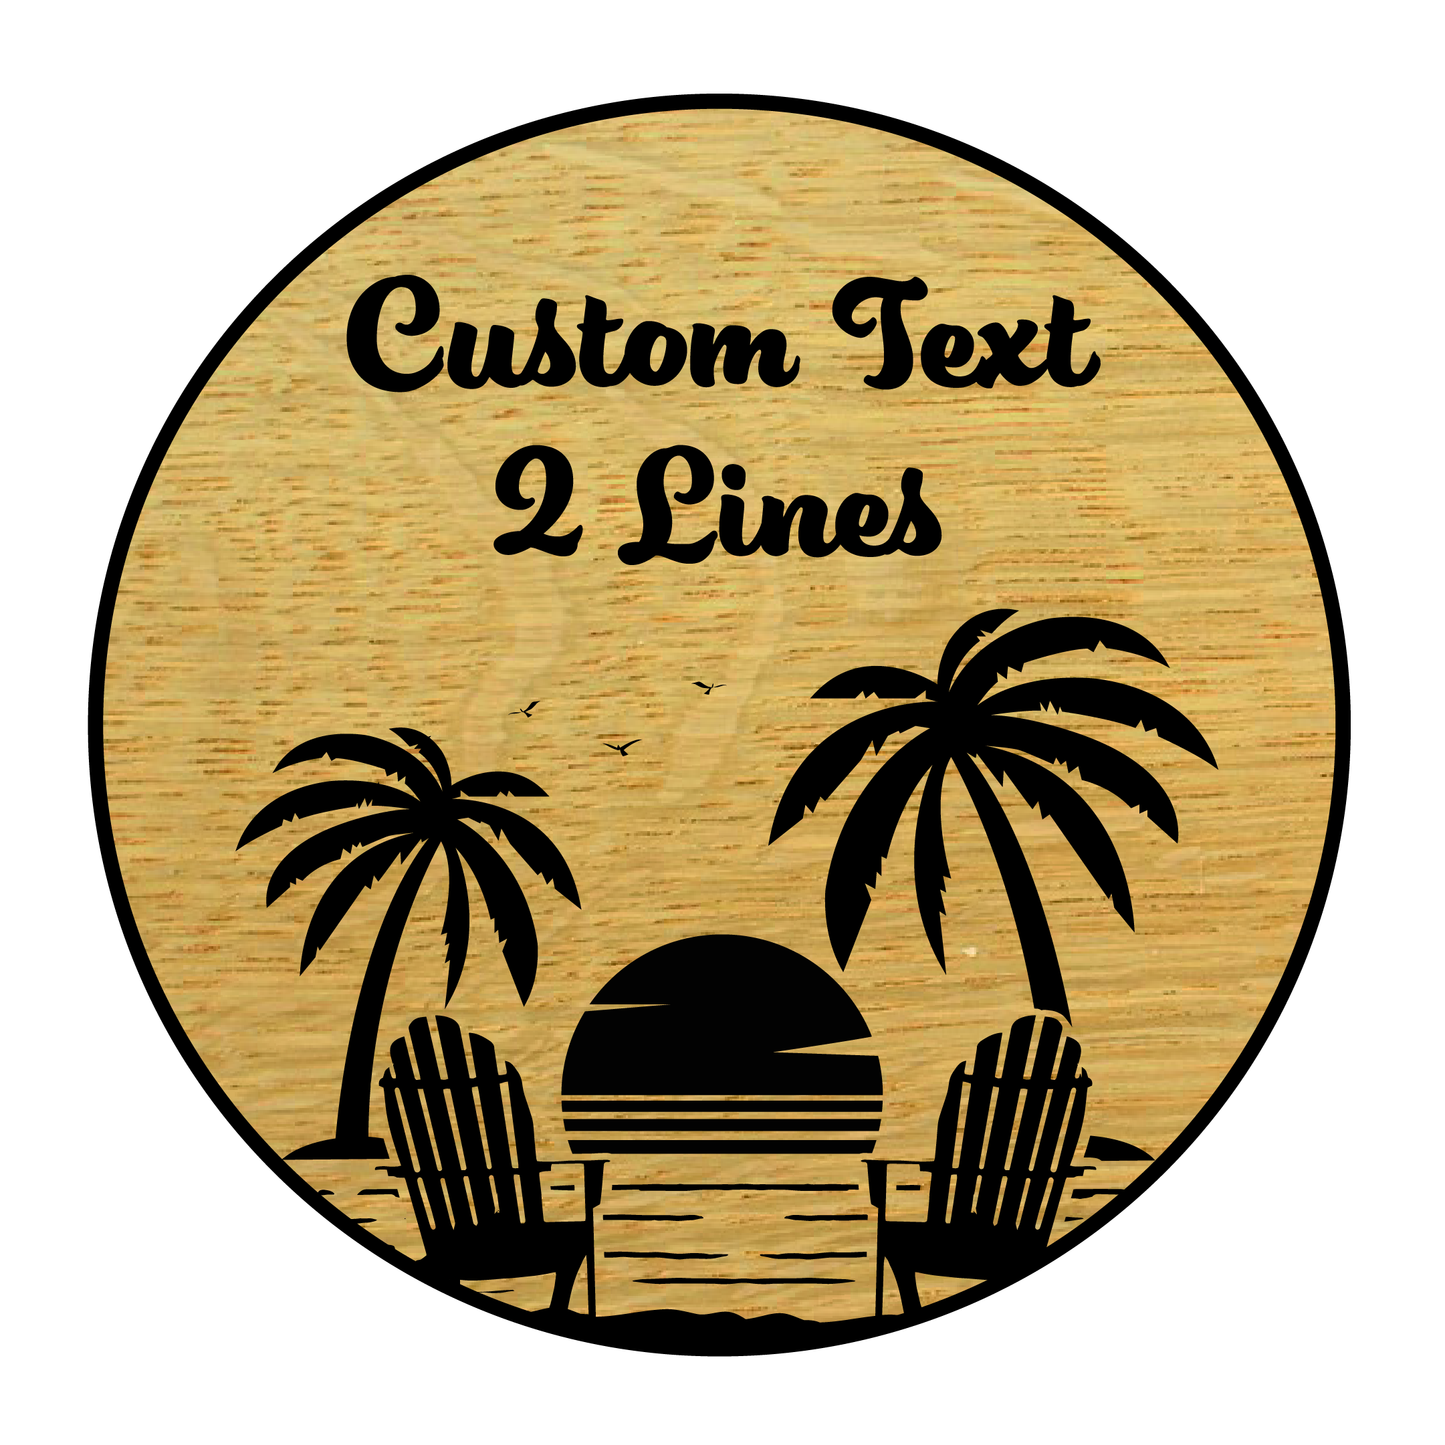 Circular Carved Wooden Sign with Beach Scene